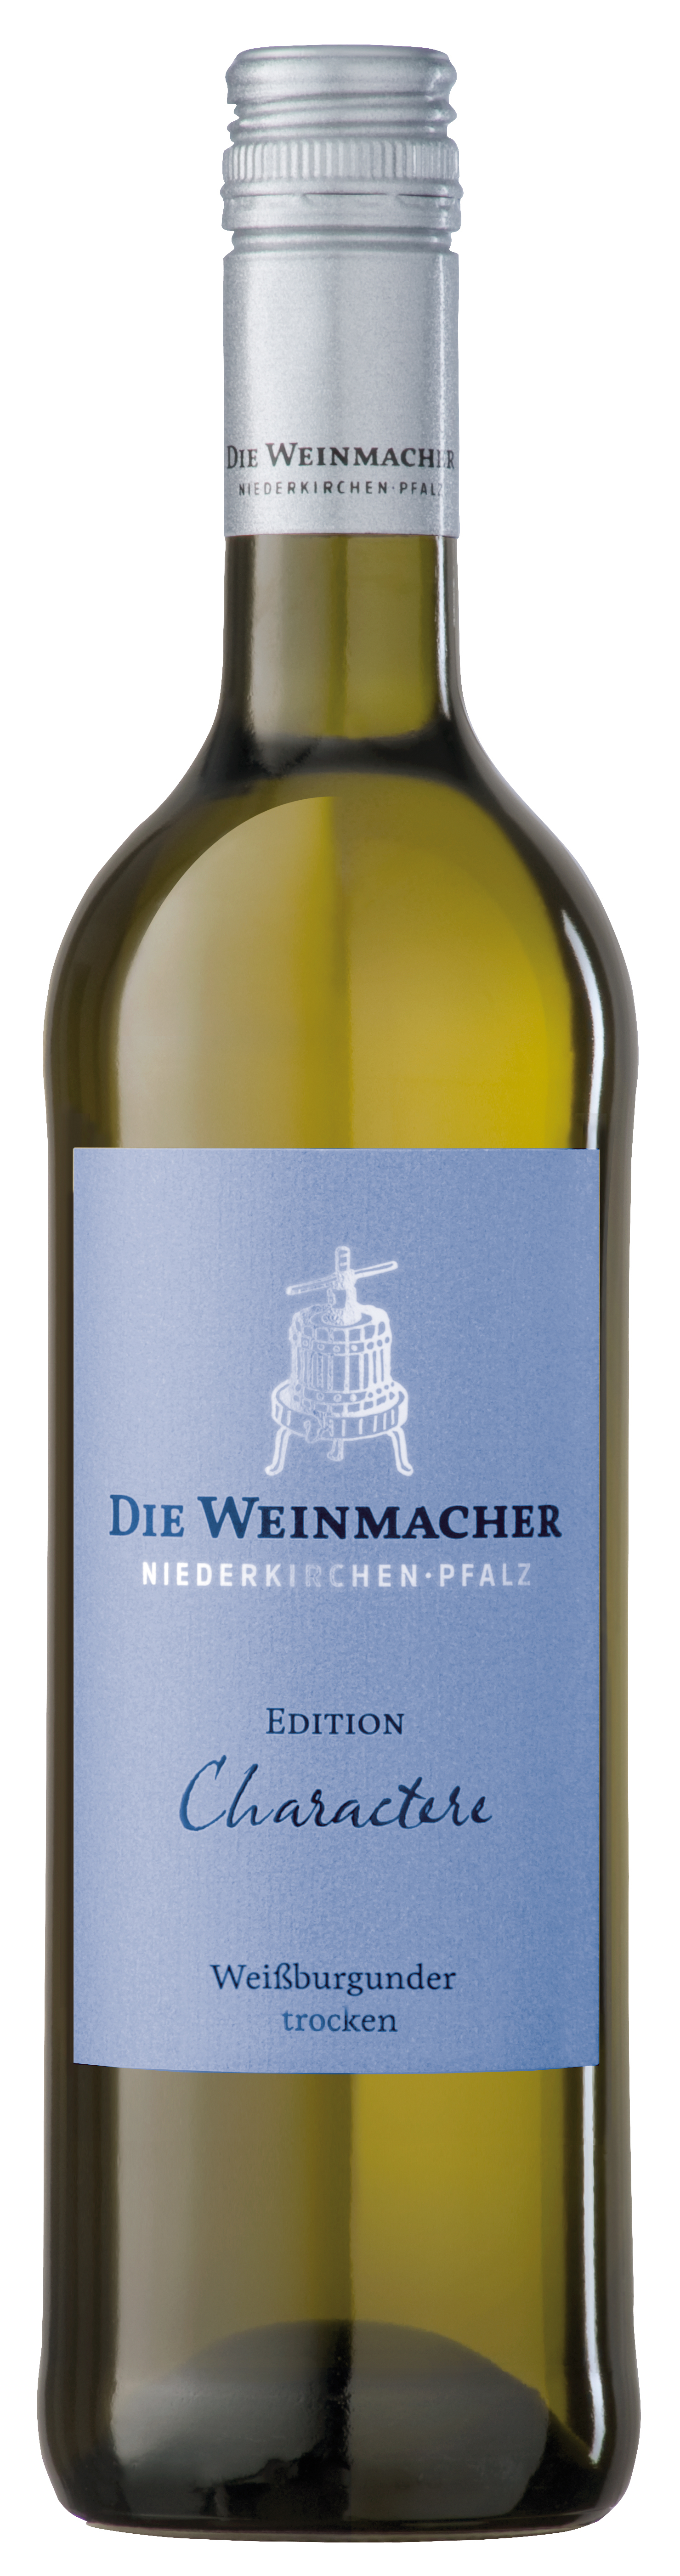 wein.plus Find+Buy: The wines of members | Find+Buy our wein.plus